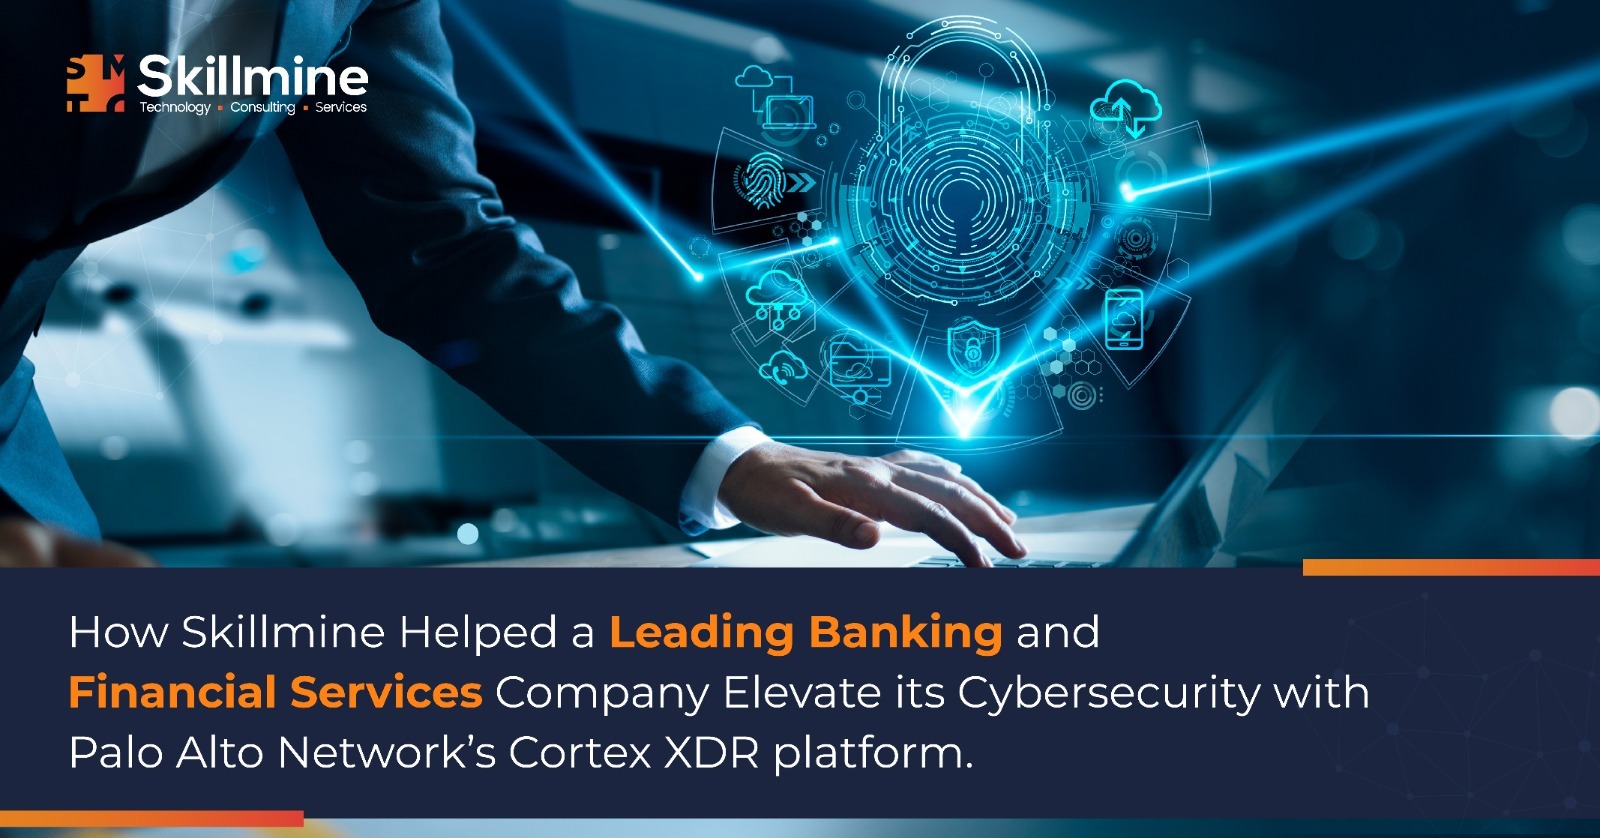 How Skillmine Helped a Leading Banking and Financial Services Company Elevate its Cybersecurity with Palo Alto Network’s Cortex XDR platform